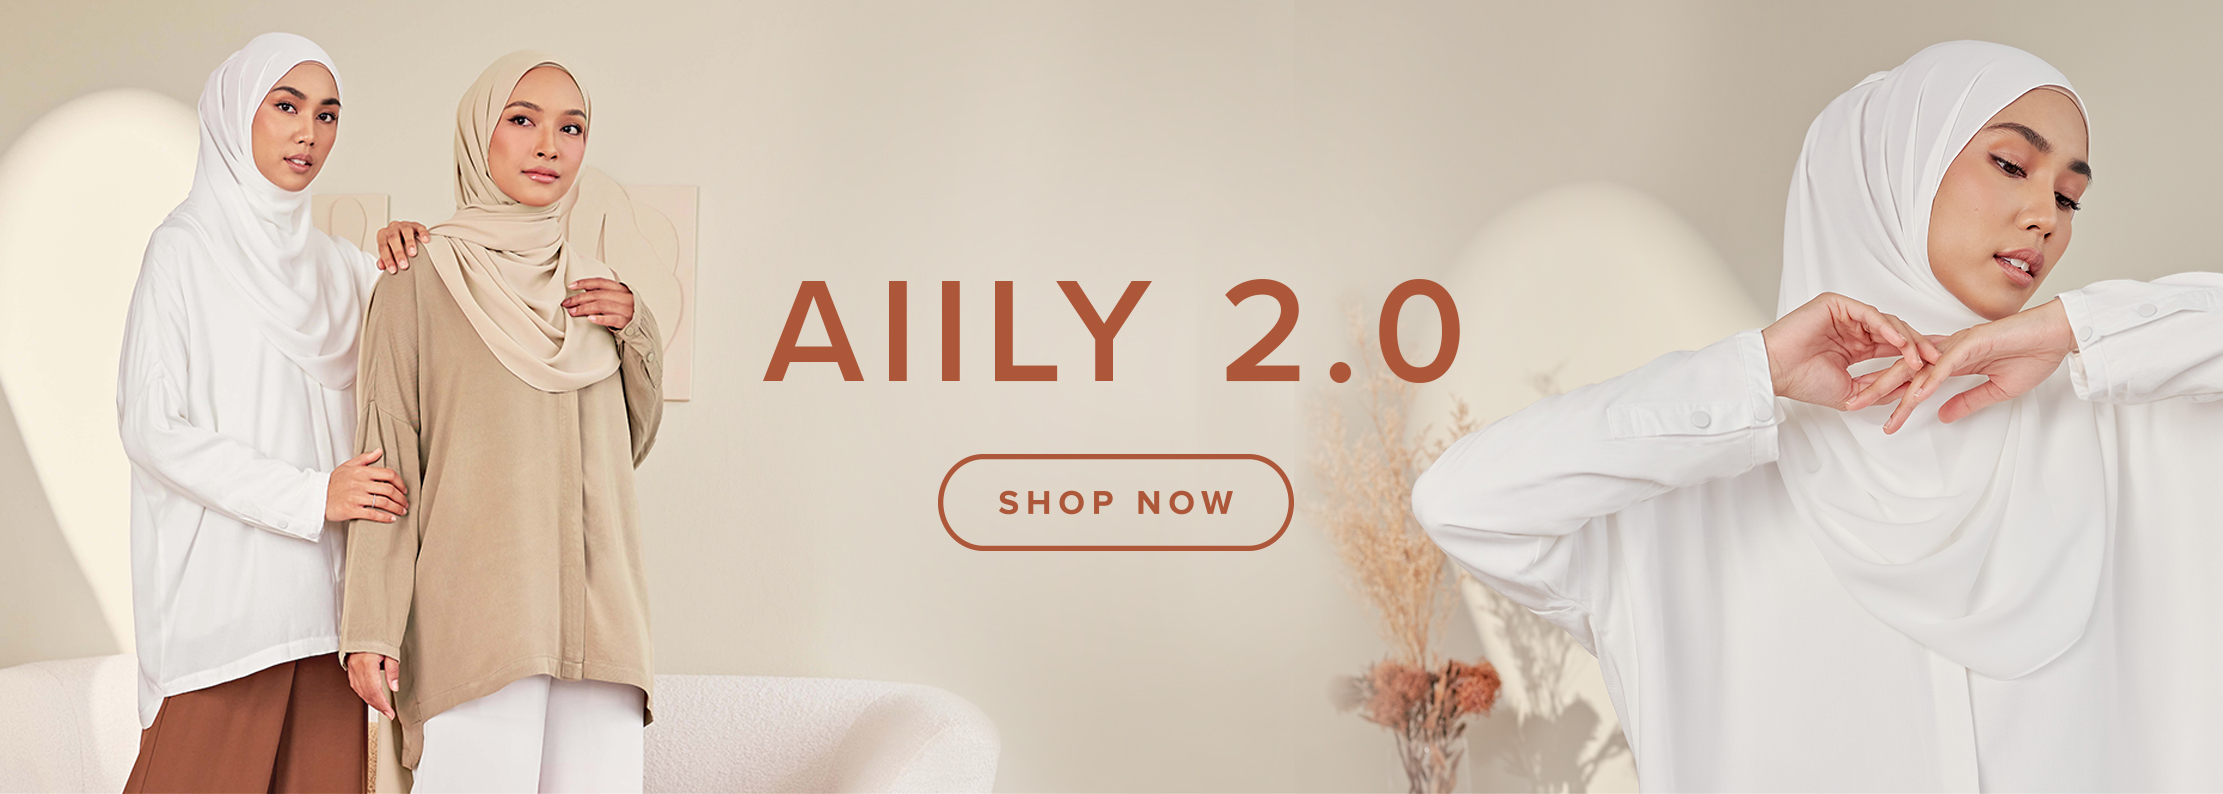 AIILY 2.0 2022